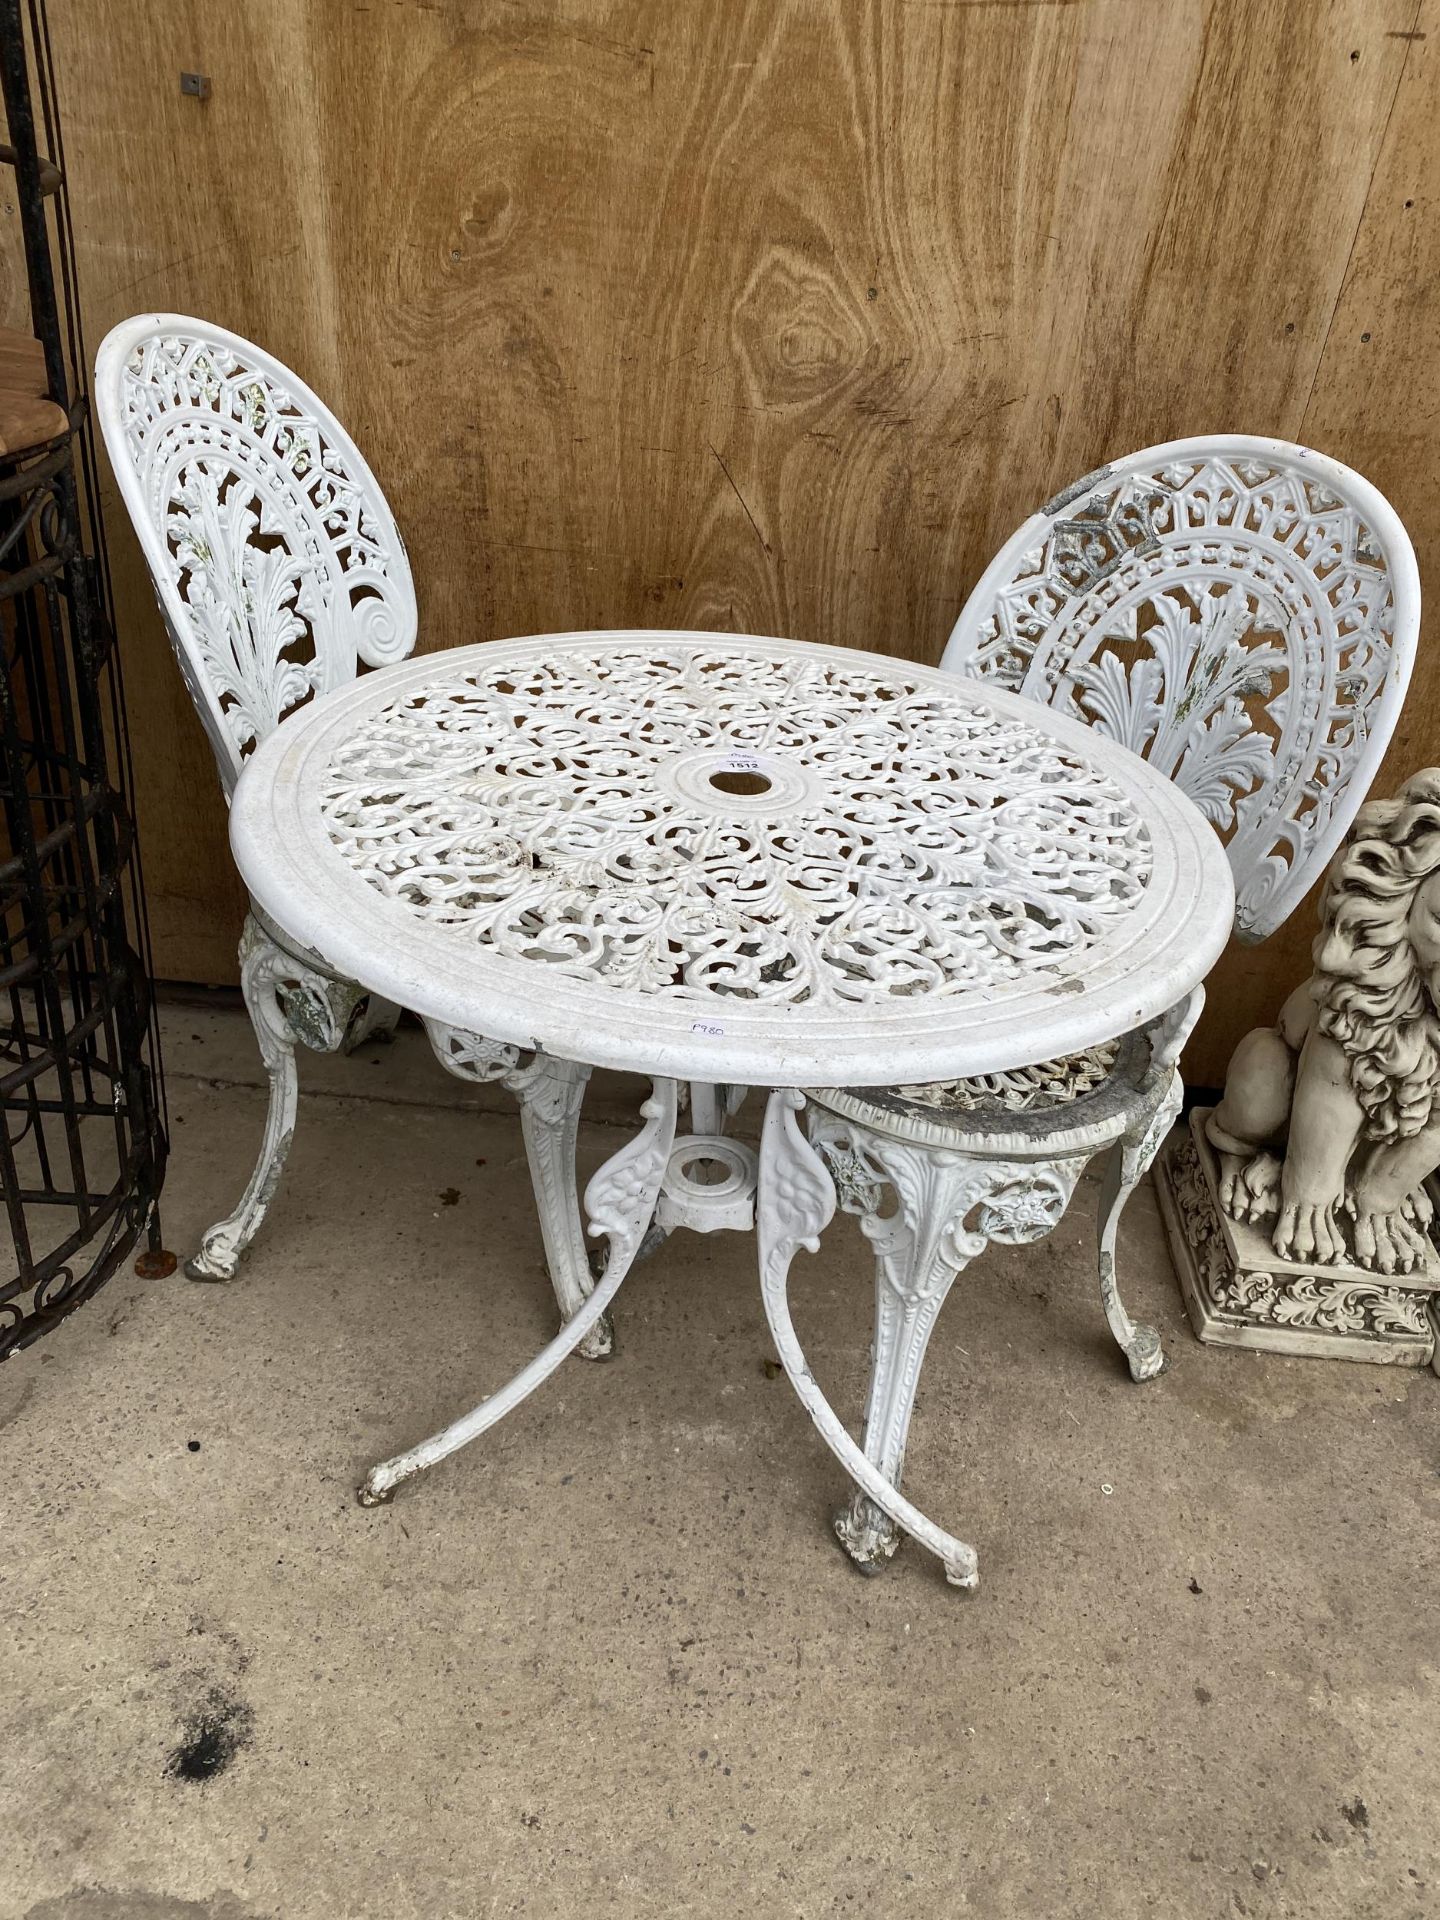 A VINTAGE CAST IRON METAL GARDEN BISTRO TABLE AND TWO CHAIRS